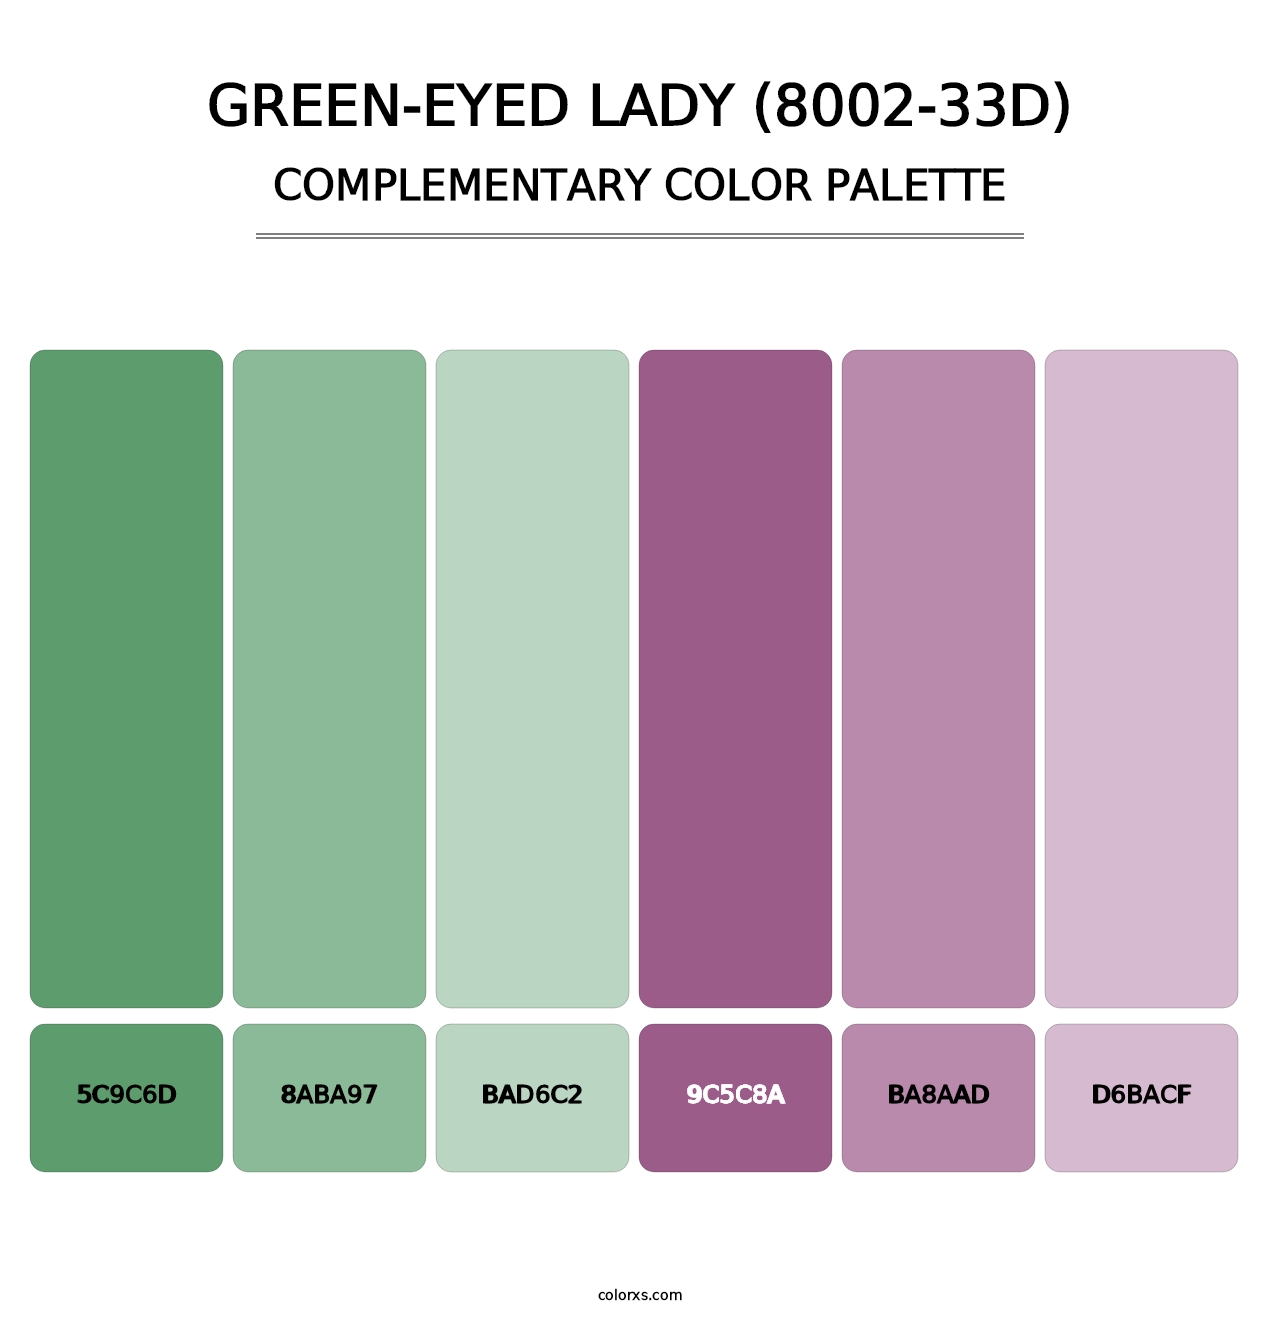 Green-Eyed Lady (8002-33D) - Complementary Color Palette